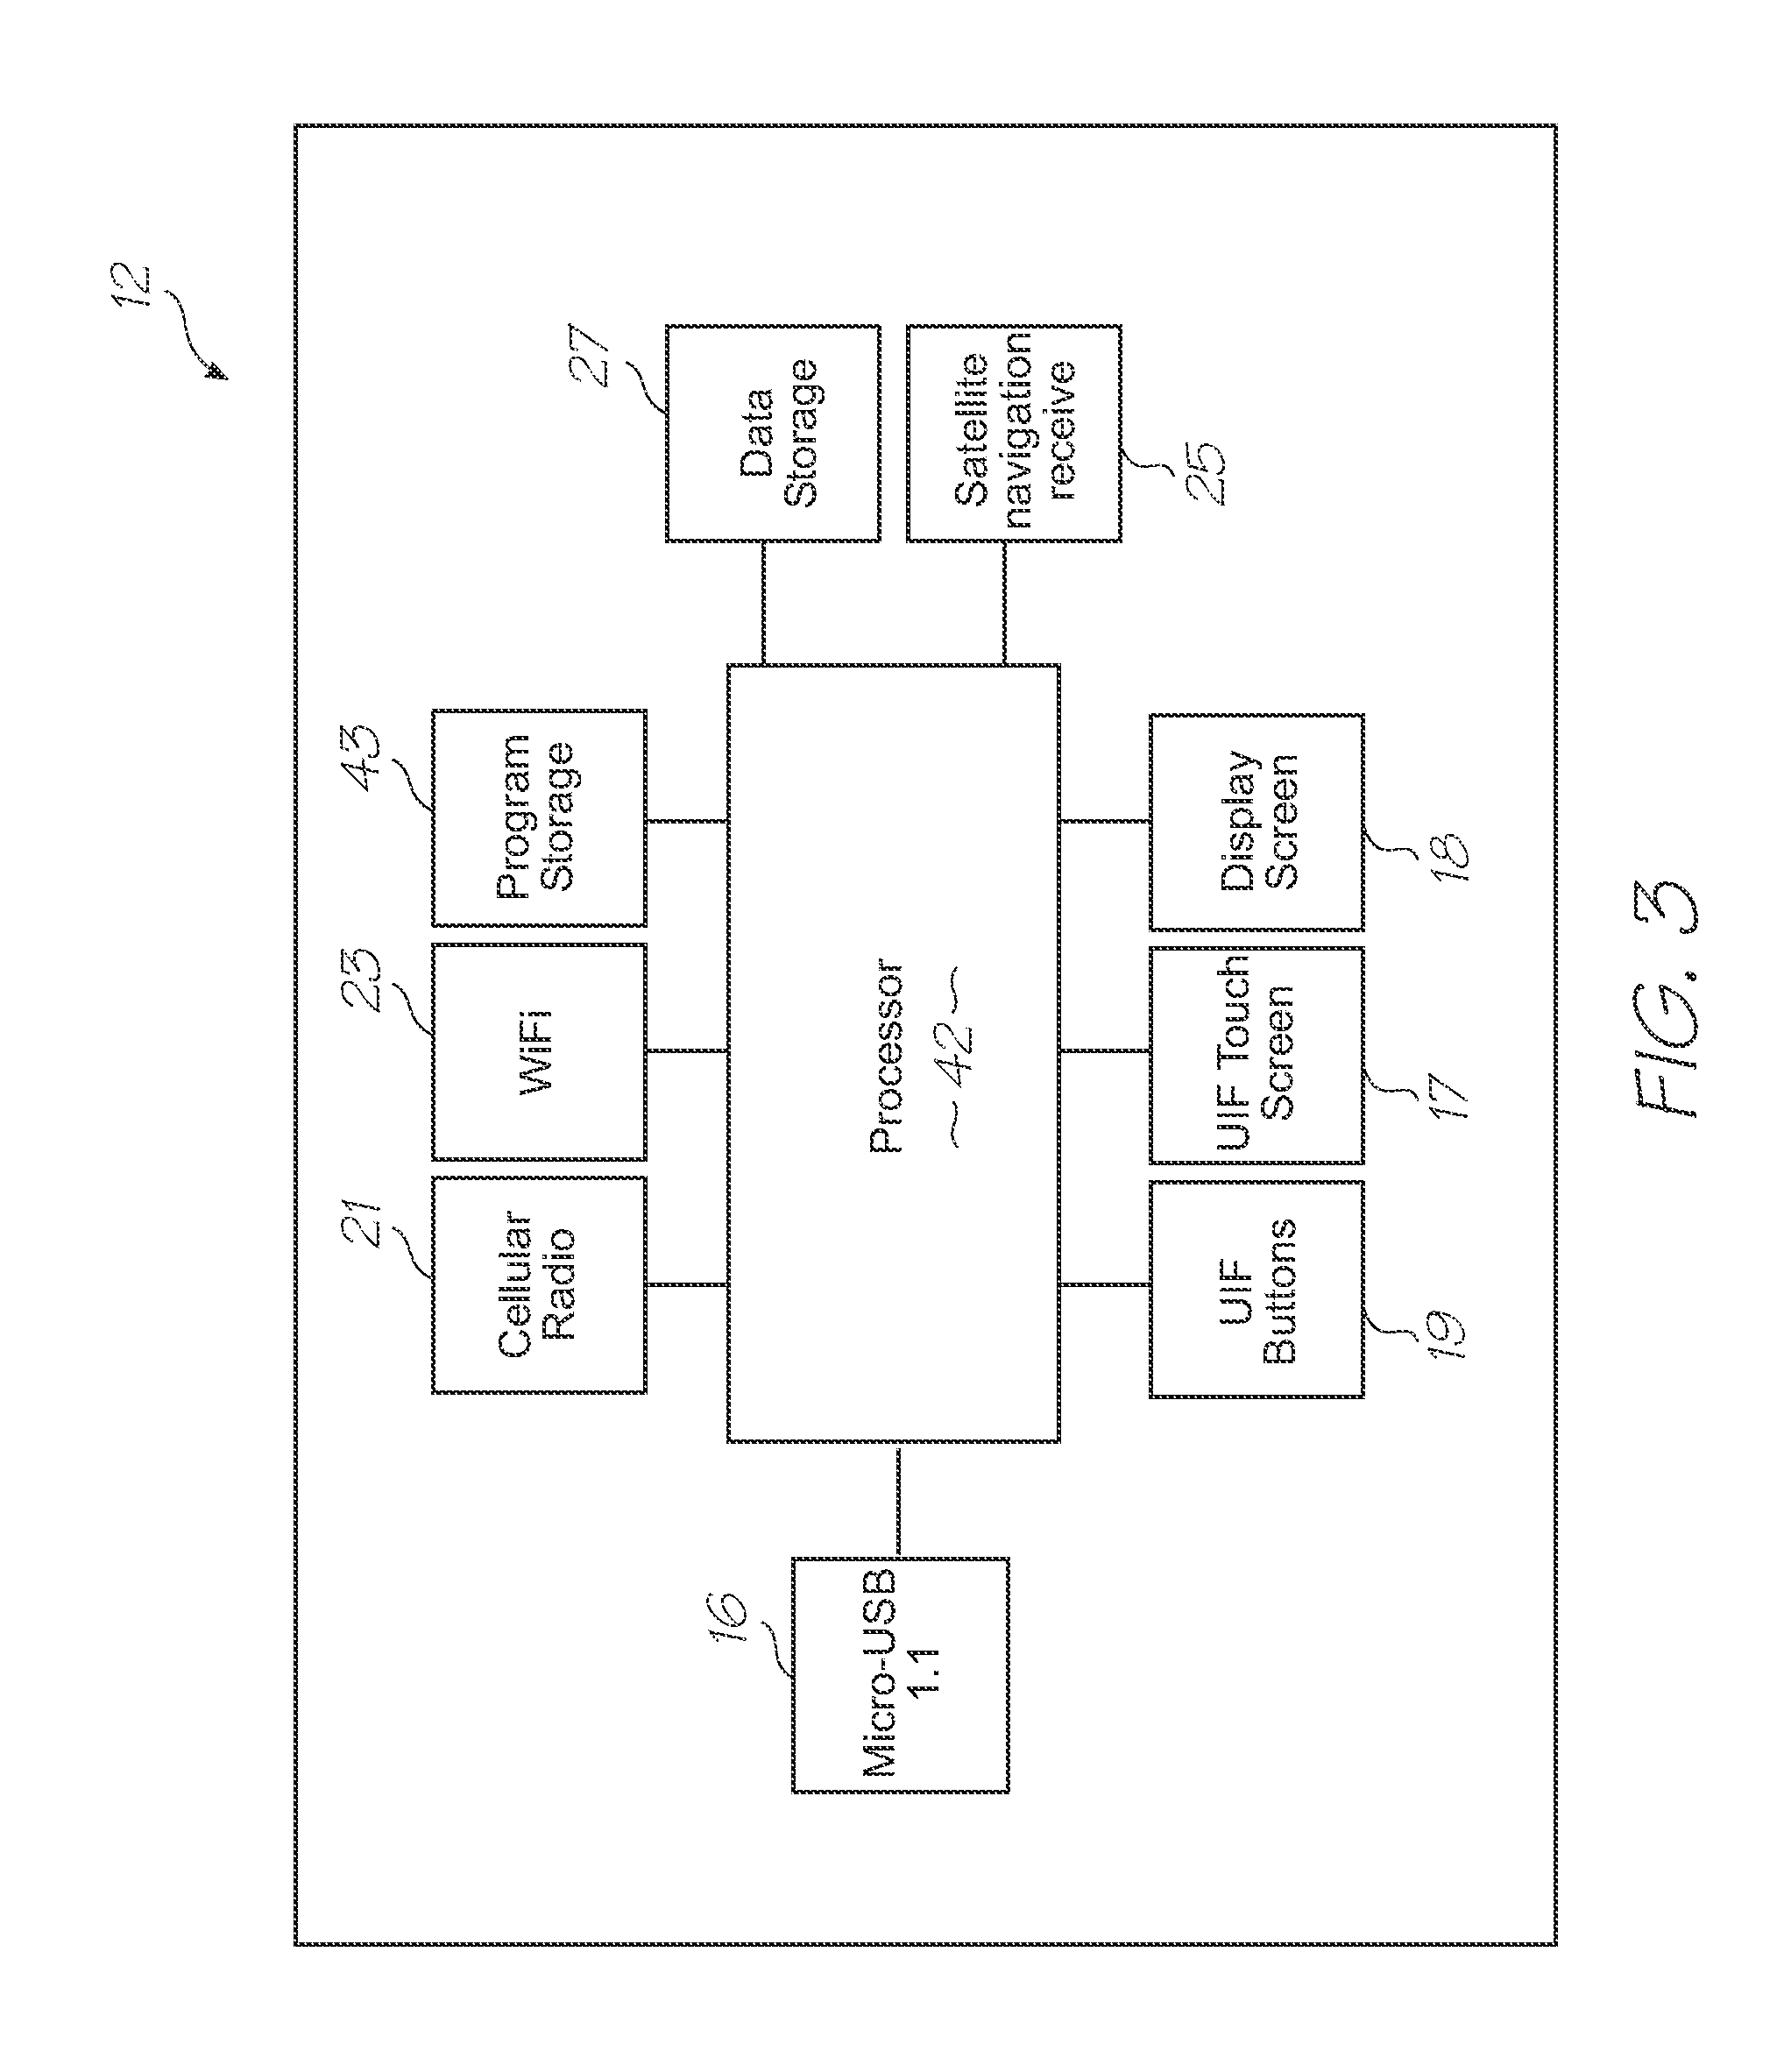 Microfluidic device for simultaneous detection of multiple conditions in a patient